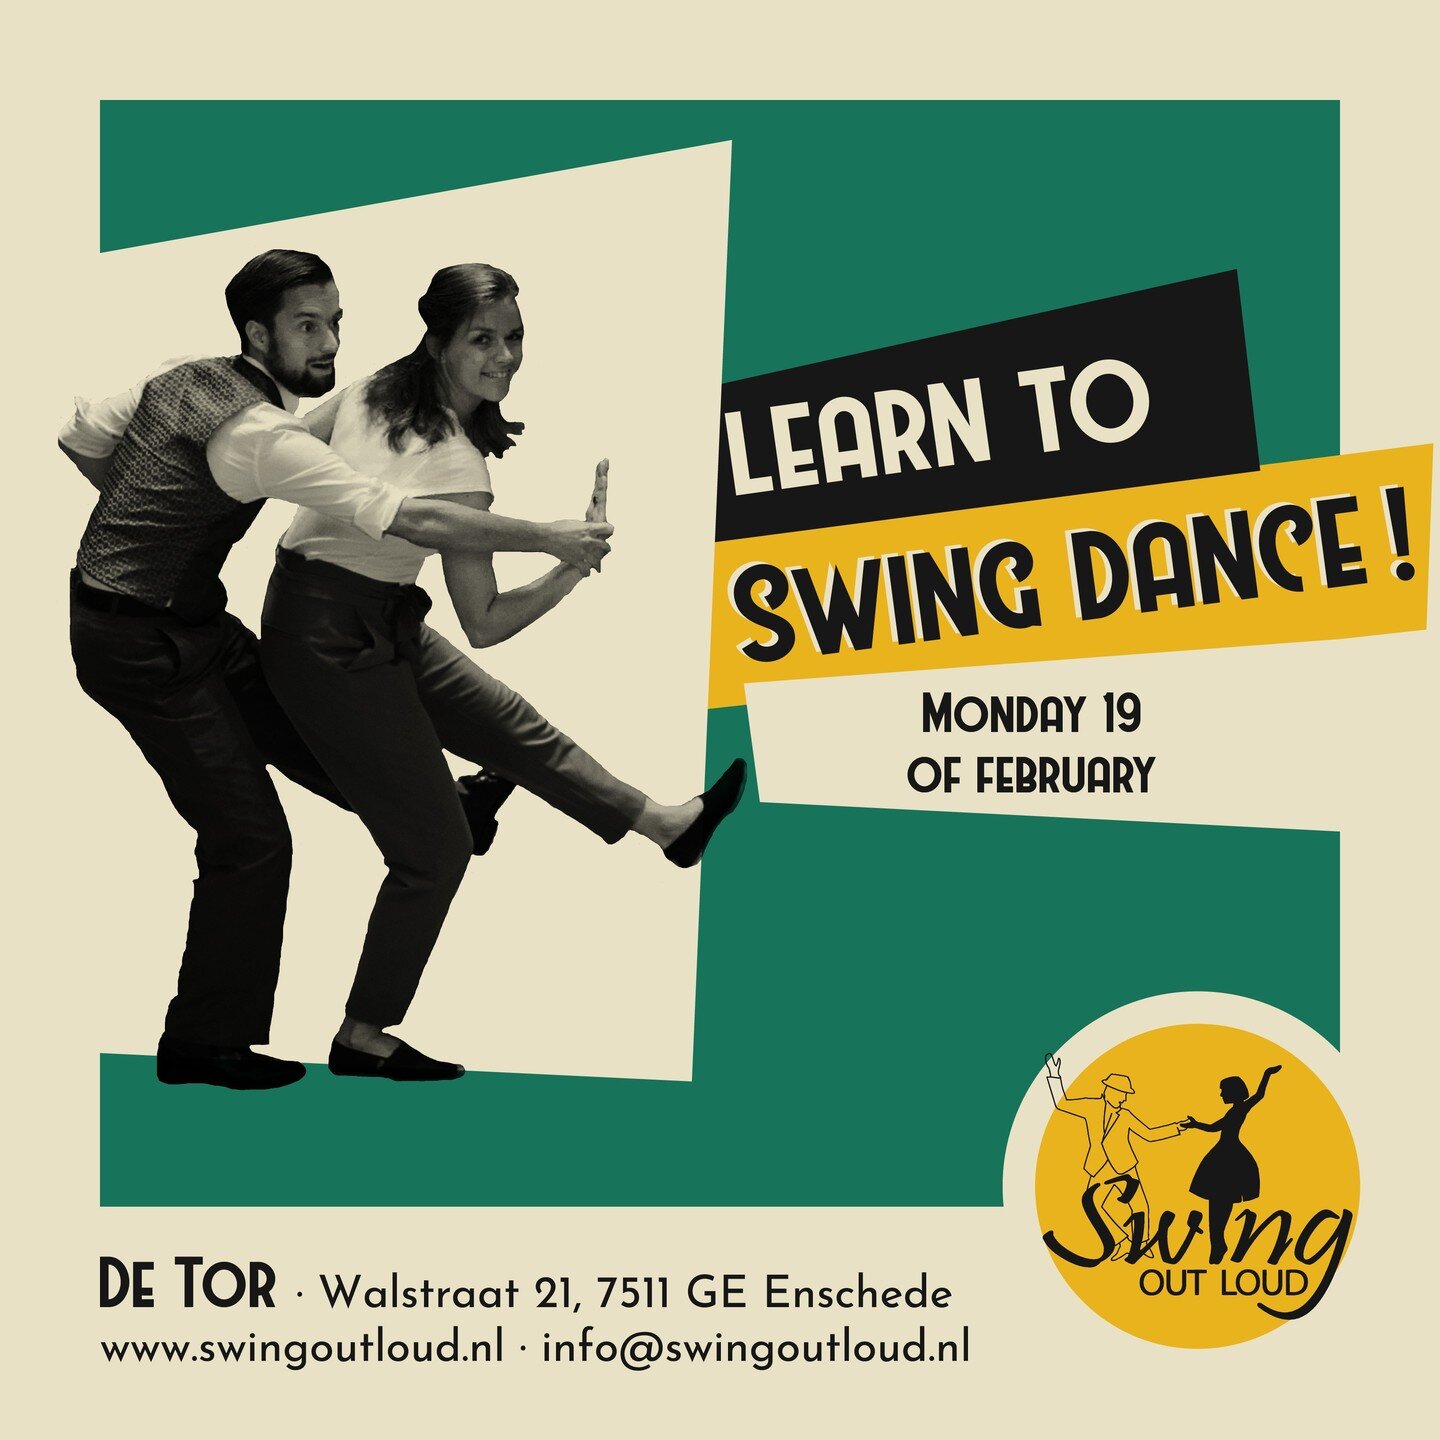 Feeling the Monday blues and yearning for the weekend already? No need to wait that long to spice up the week! Dip your toes into the world of swing dancing at Jazzpodium De Tor on Monday, 19th of February 💃🕺

Doors open at 19h15 and our free 𝗟𝗶?